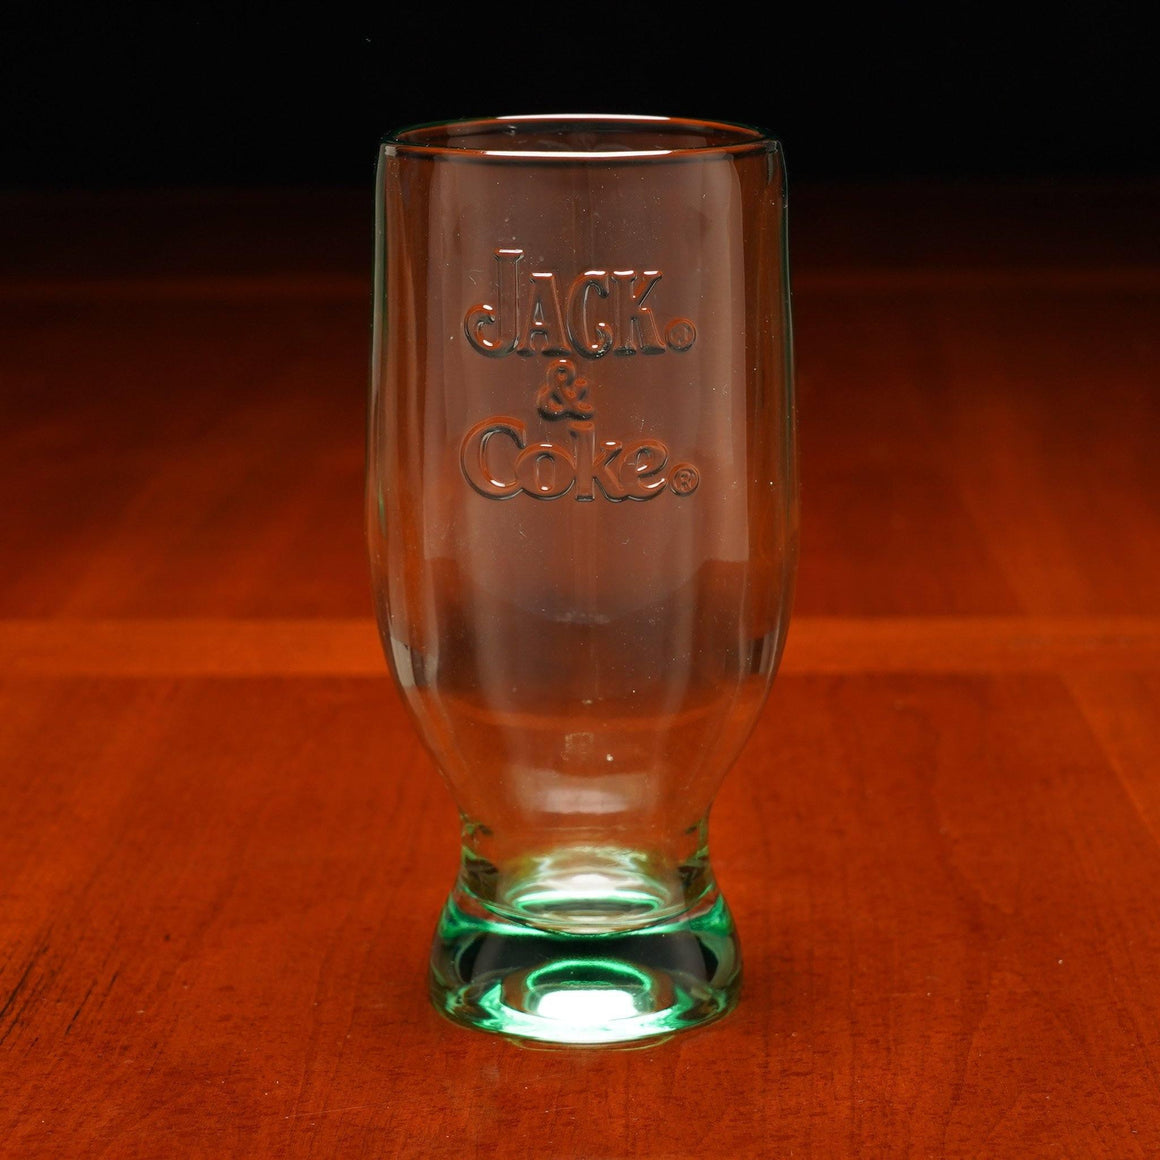 Jack Daniel’s Promotional “Jack and Coke” Glass - The Whiskey Cave